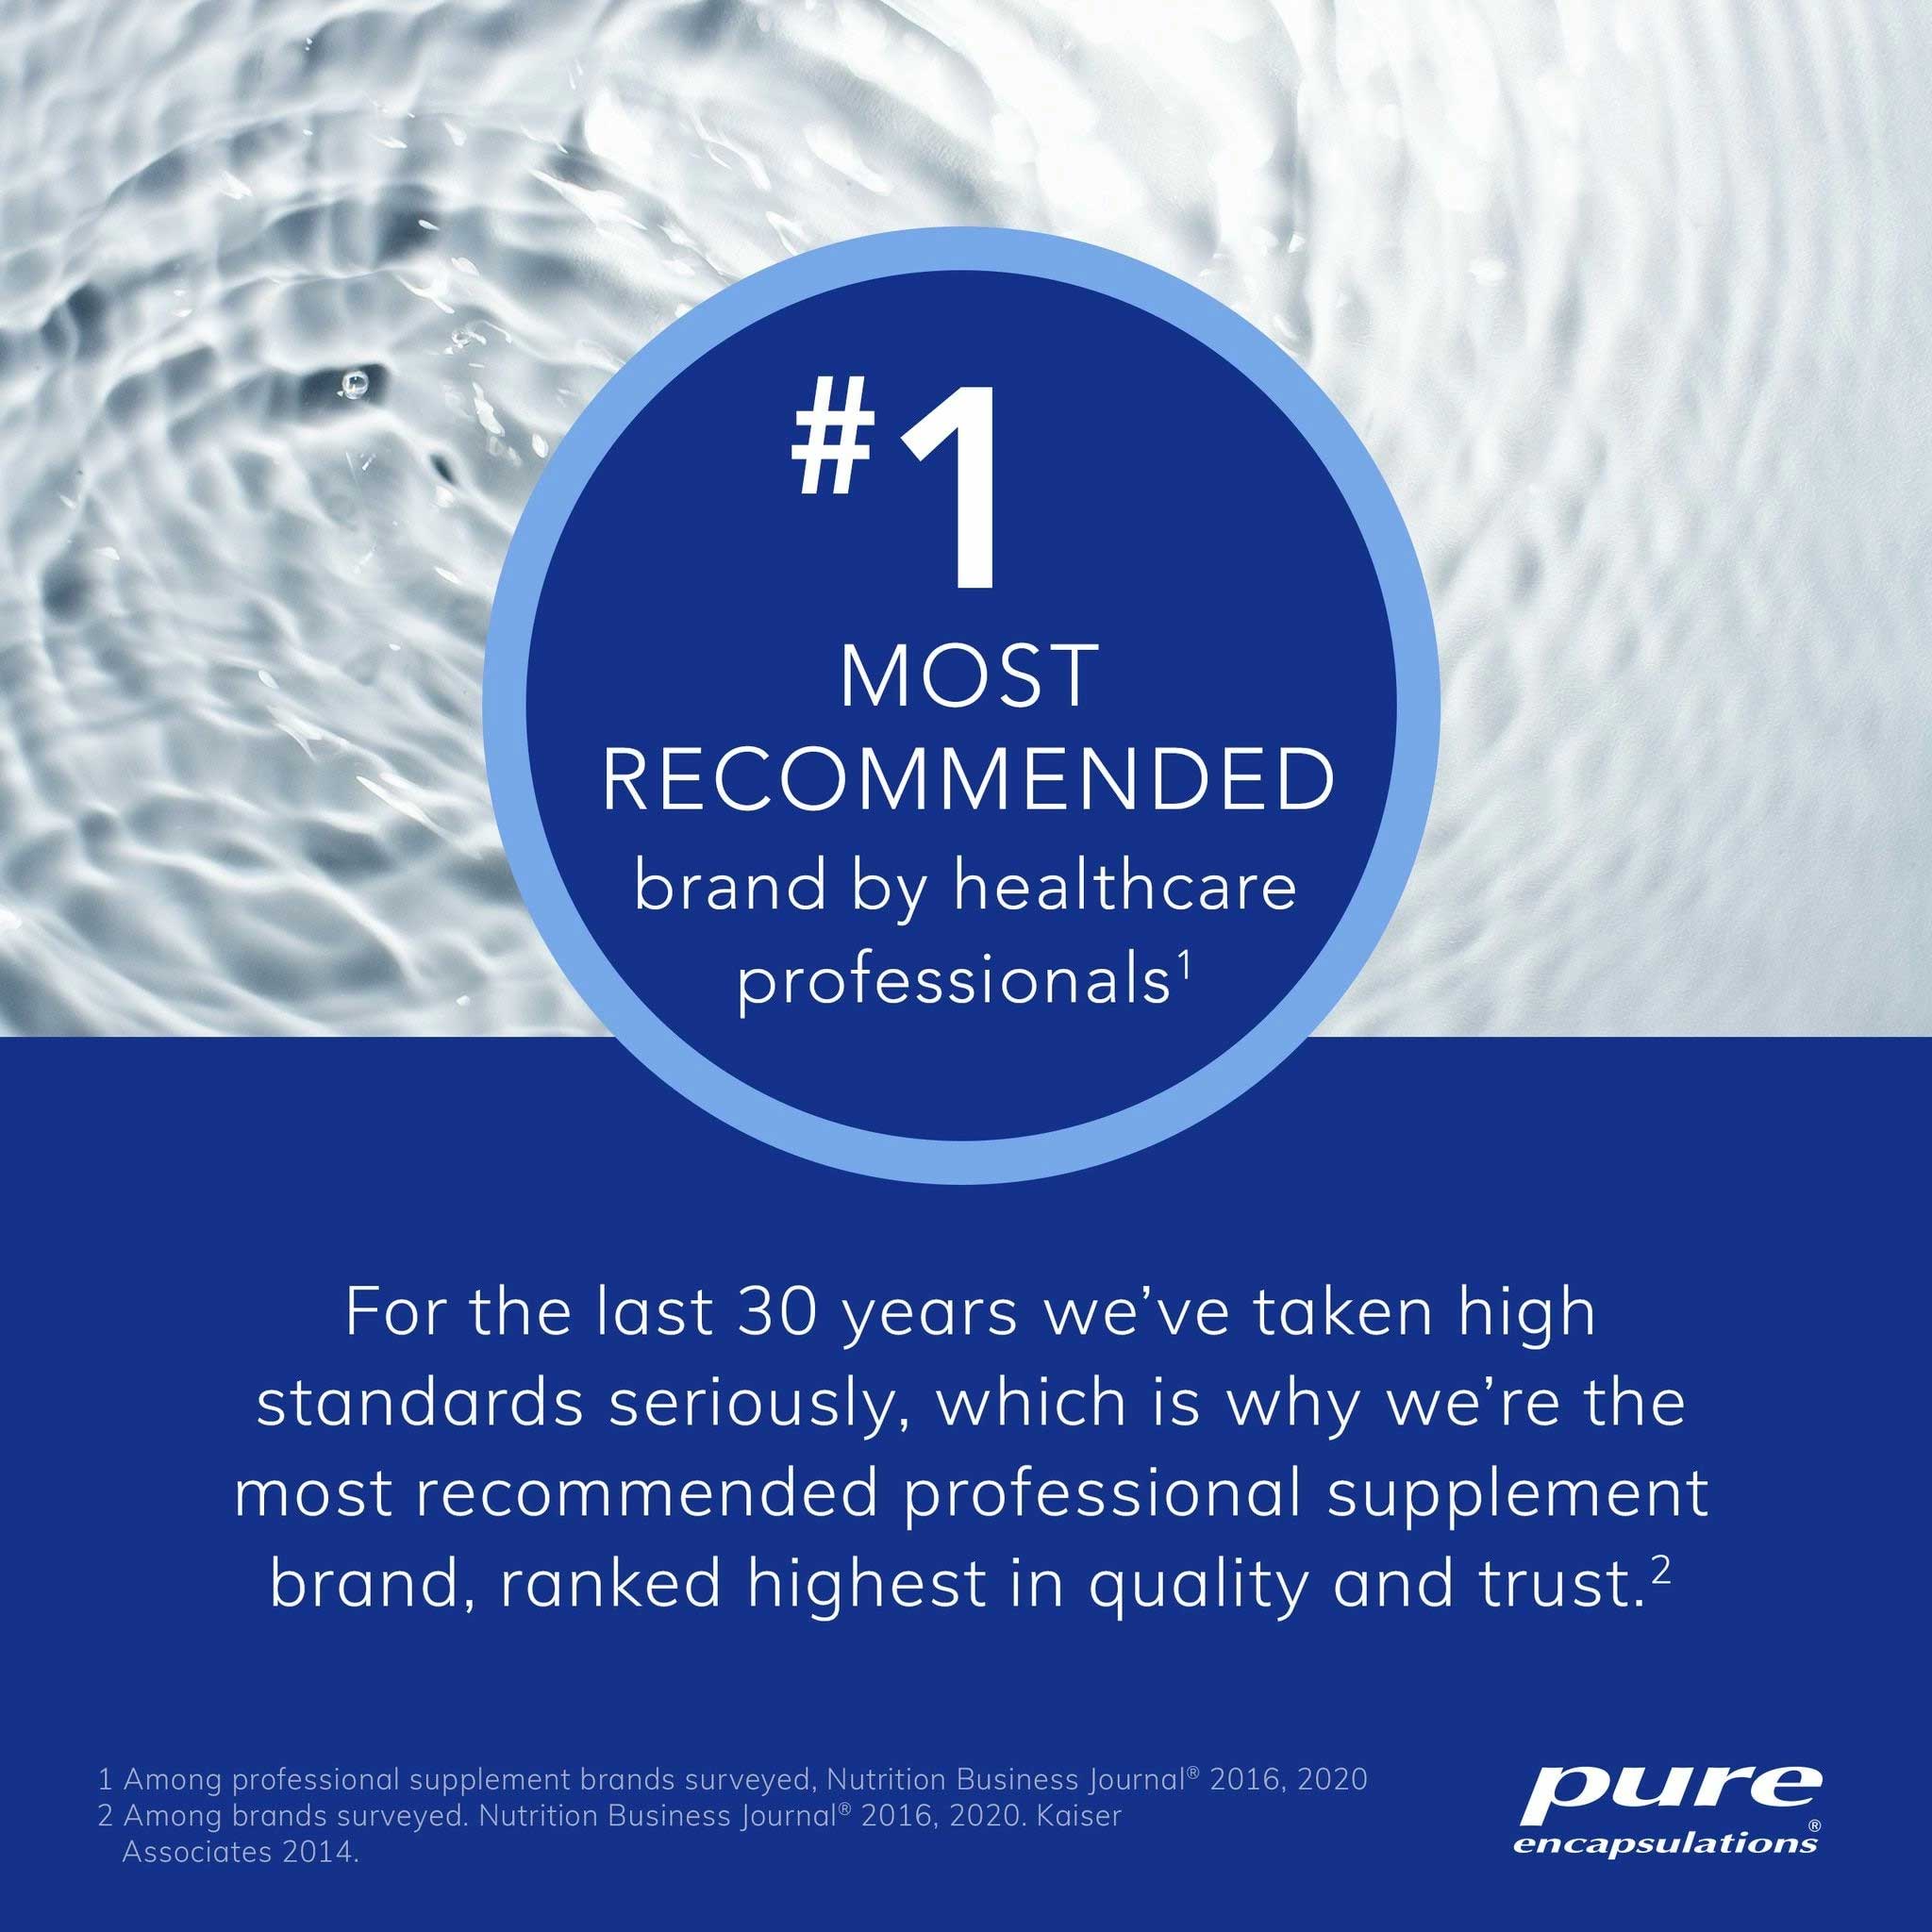 Pure Encapsulations Vitamin E Most Recommended Brand